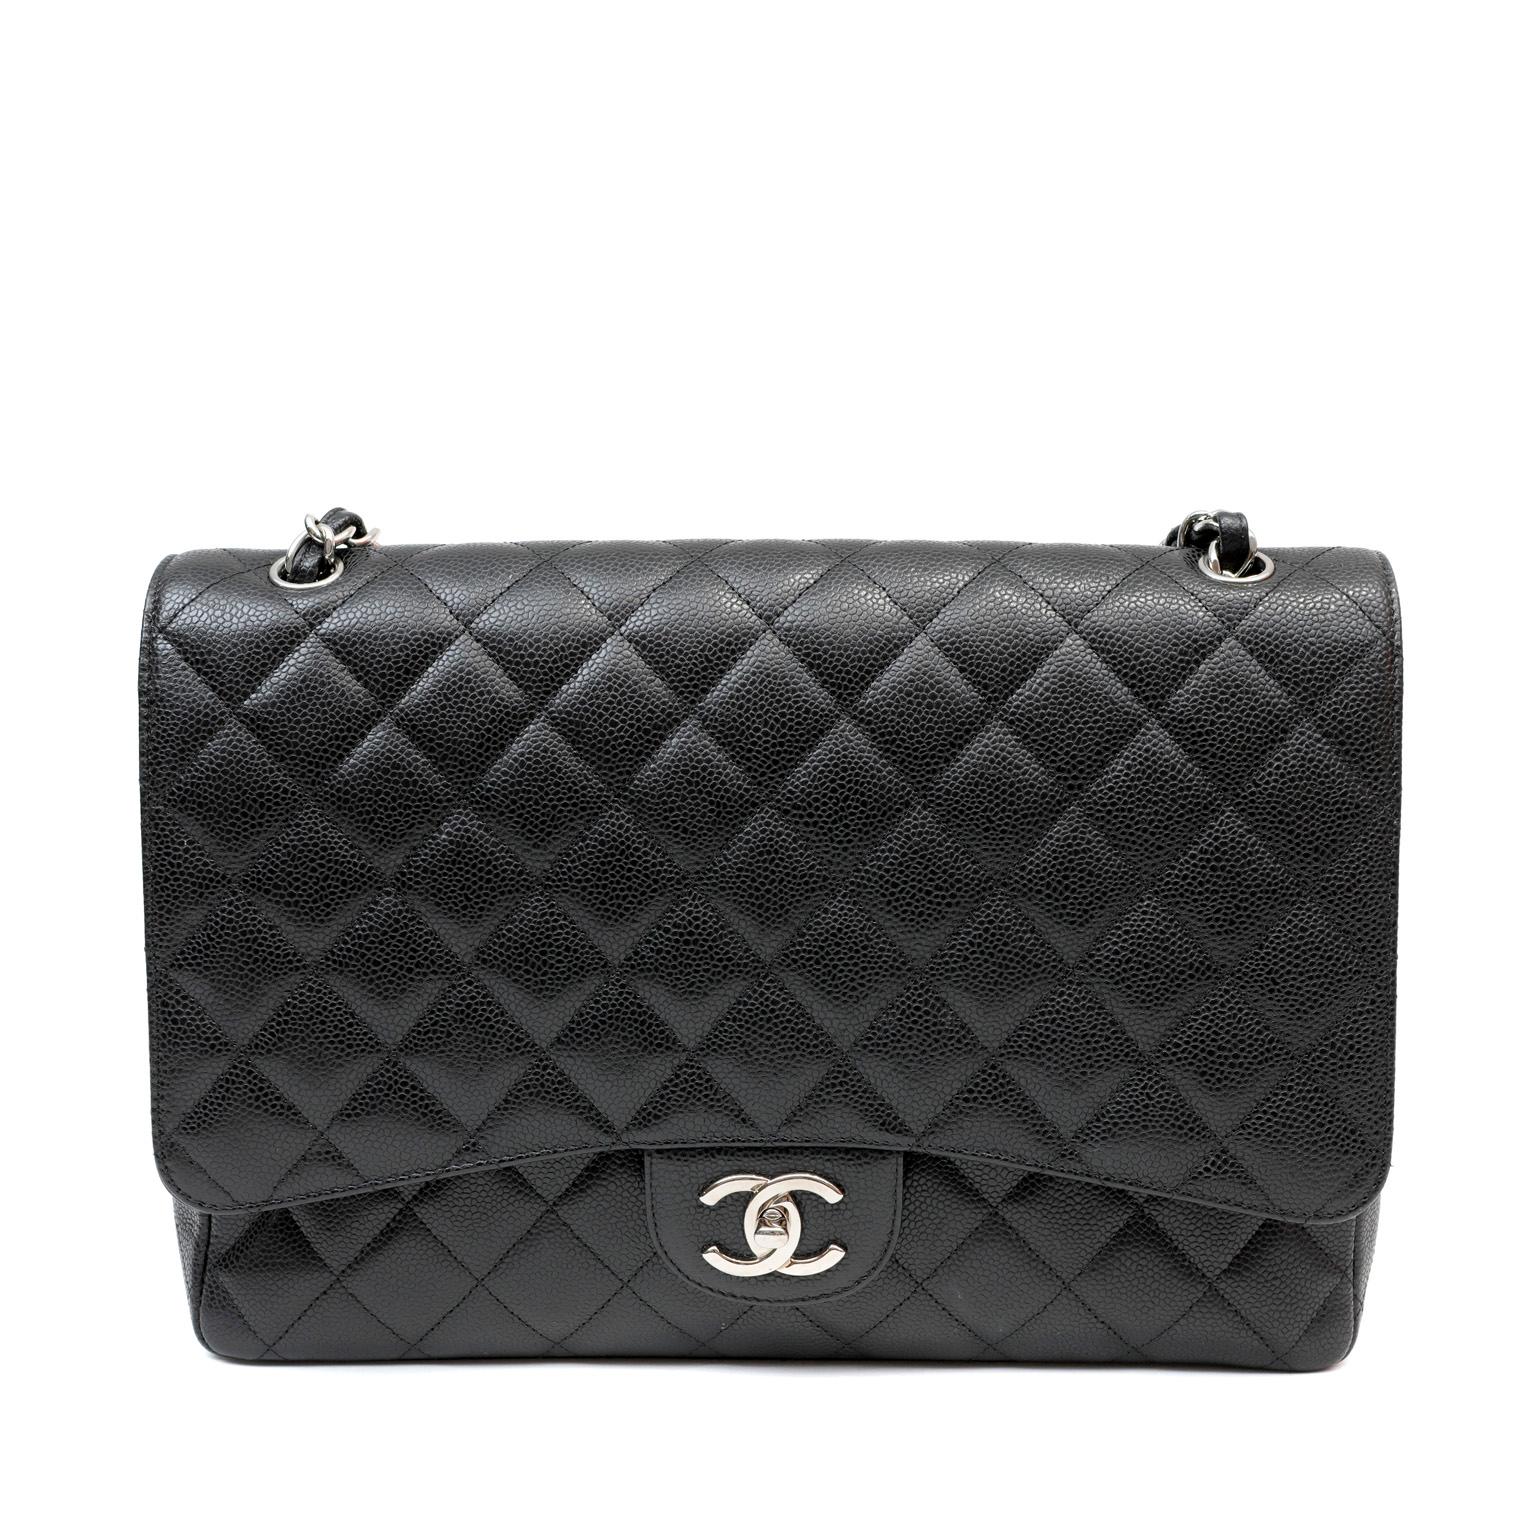 This authentic Chanel Black Caviar Leather Double Flap Maxi is in pristine condition. Paired with silver hardware, the Maxi silhouette is an extremely sought-after classic. Durable and textured black caviar leather is quilted in signature Chanel